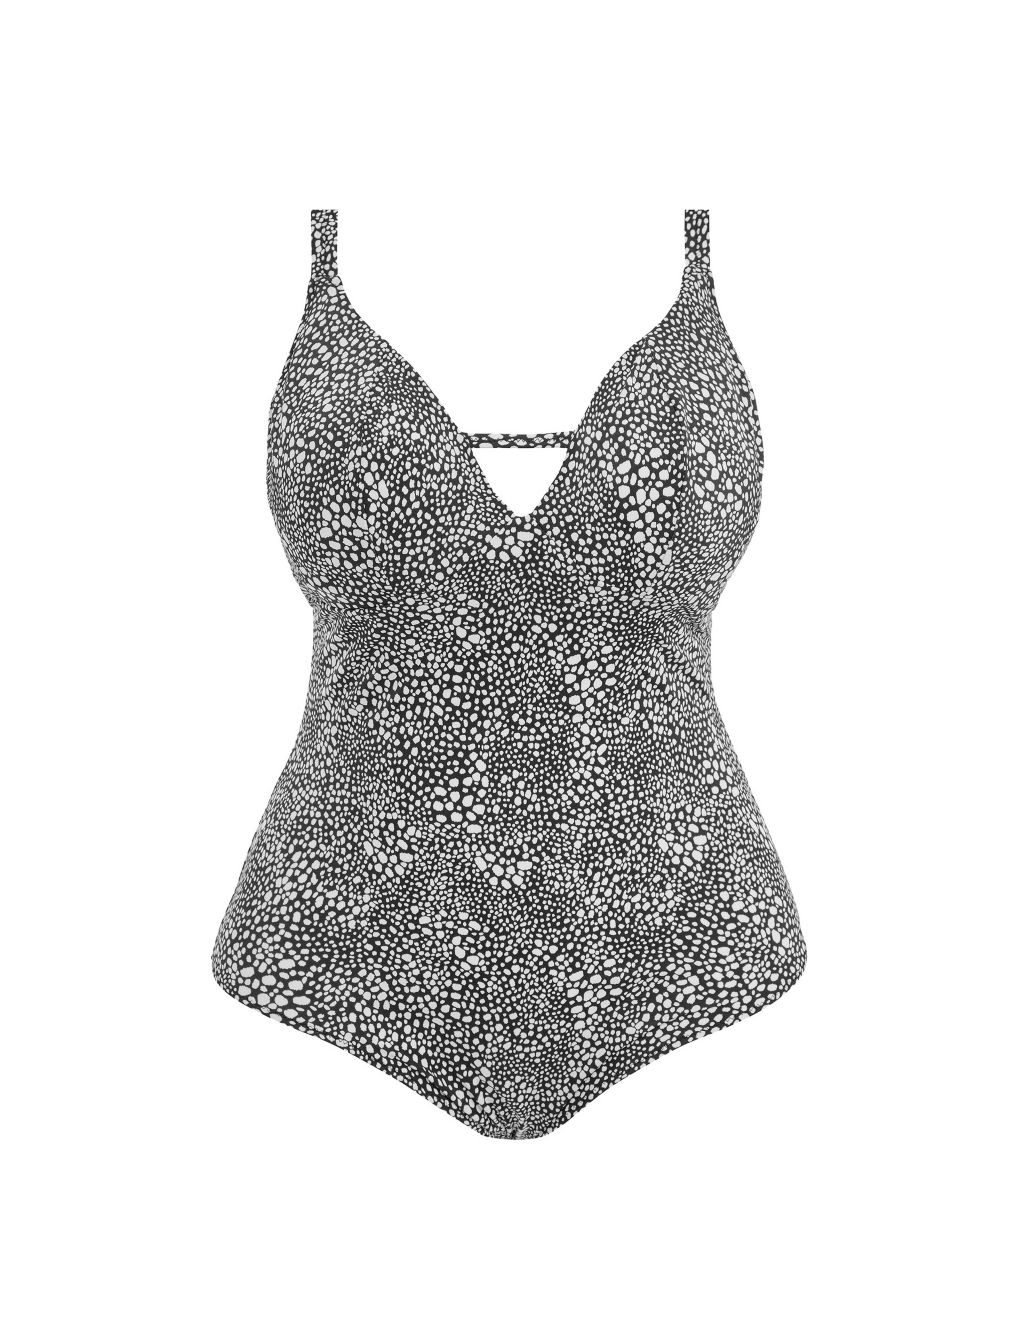 Printed Plunge Swimsuit image 2